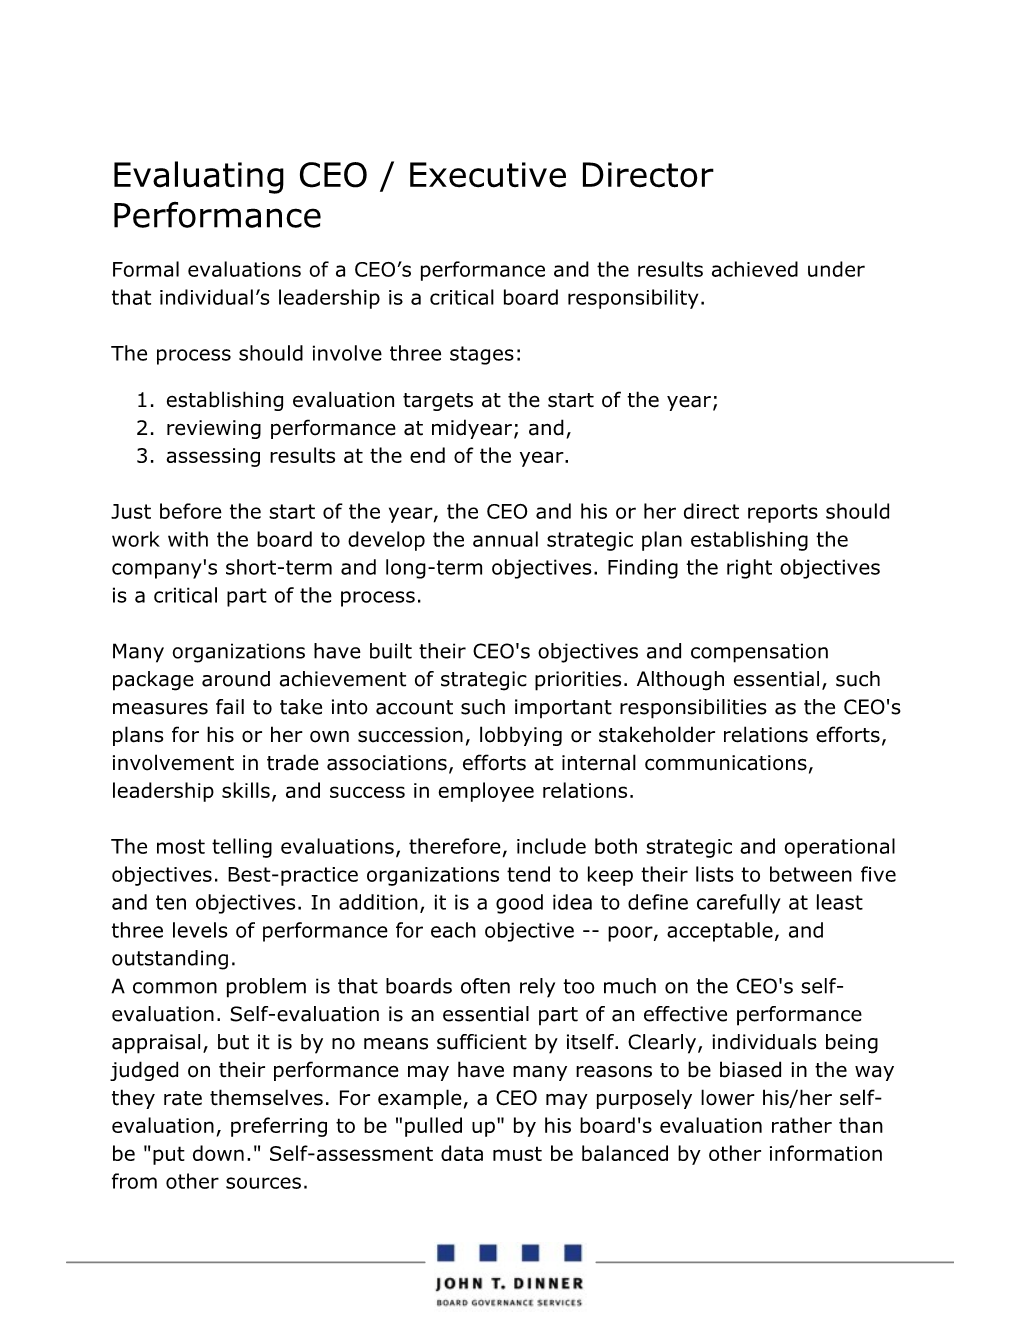 Evaluating CEO / Executive Director Performance